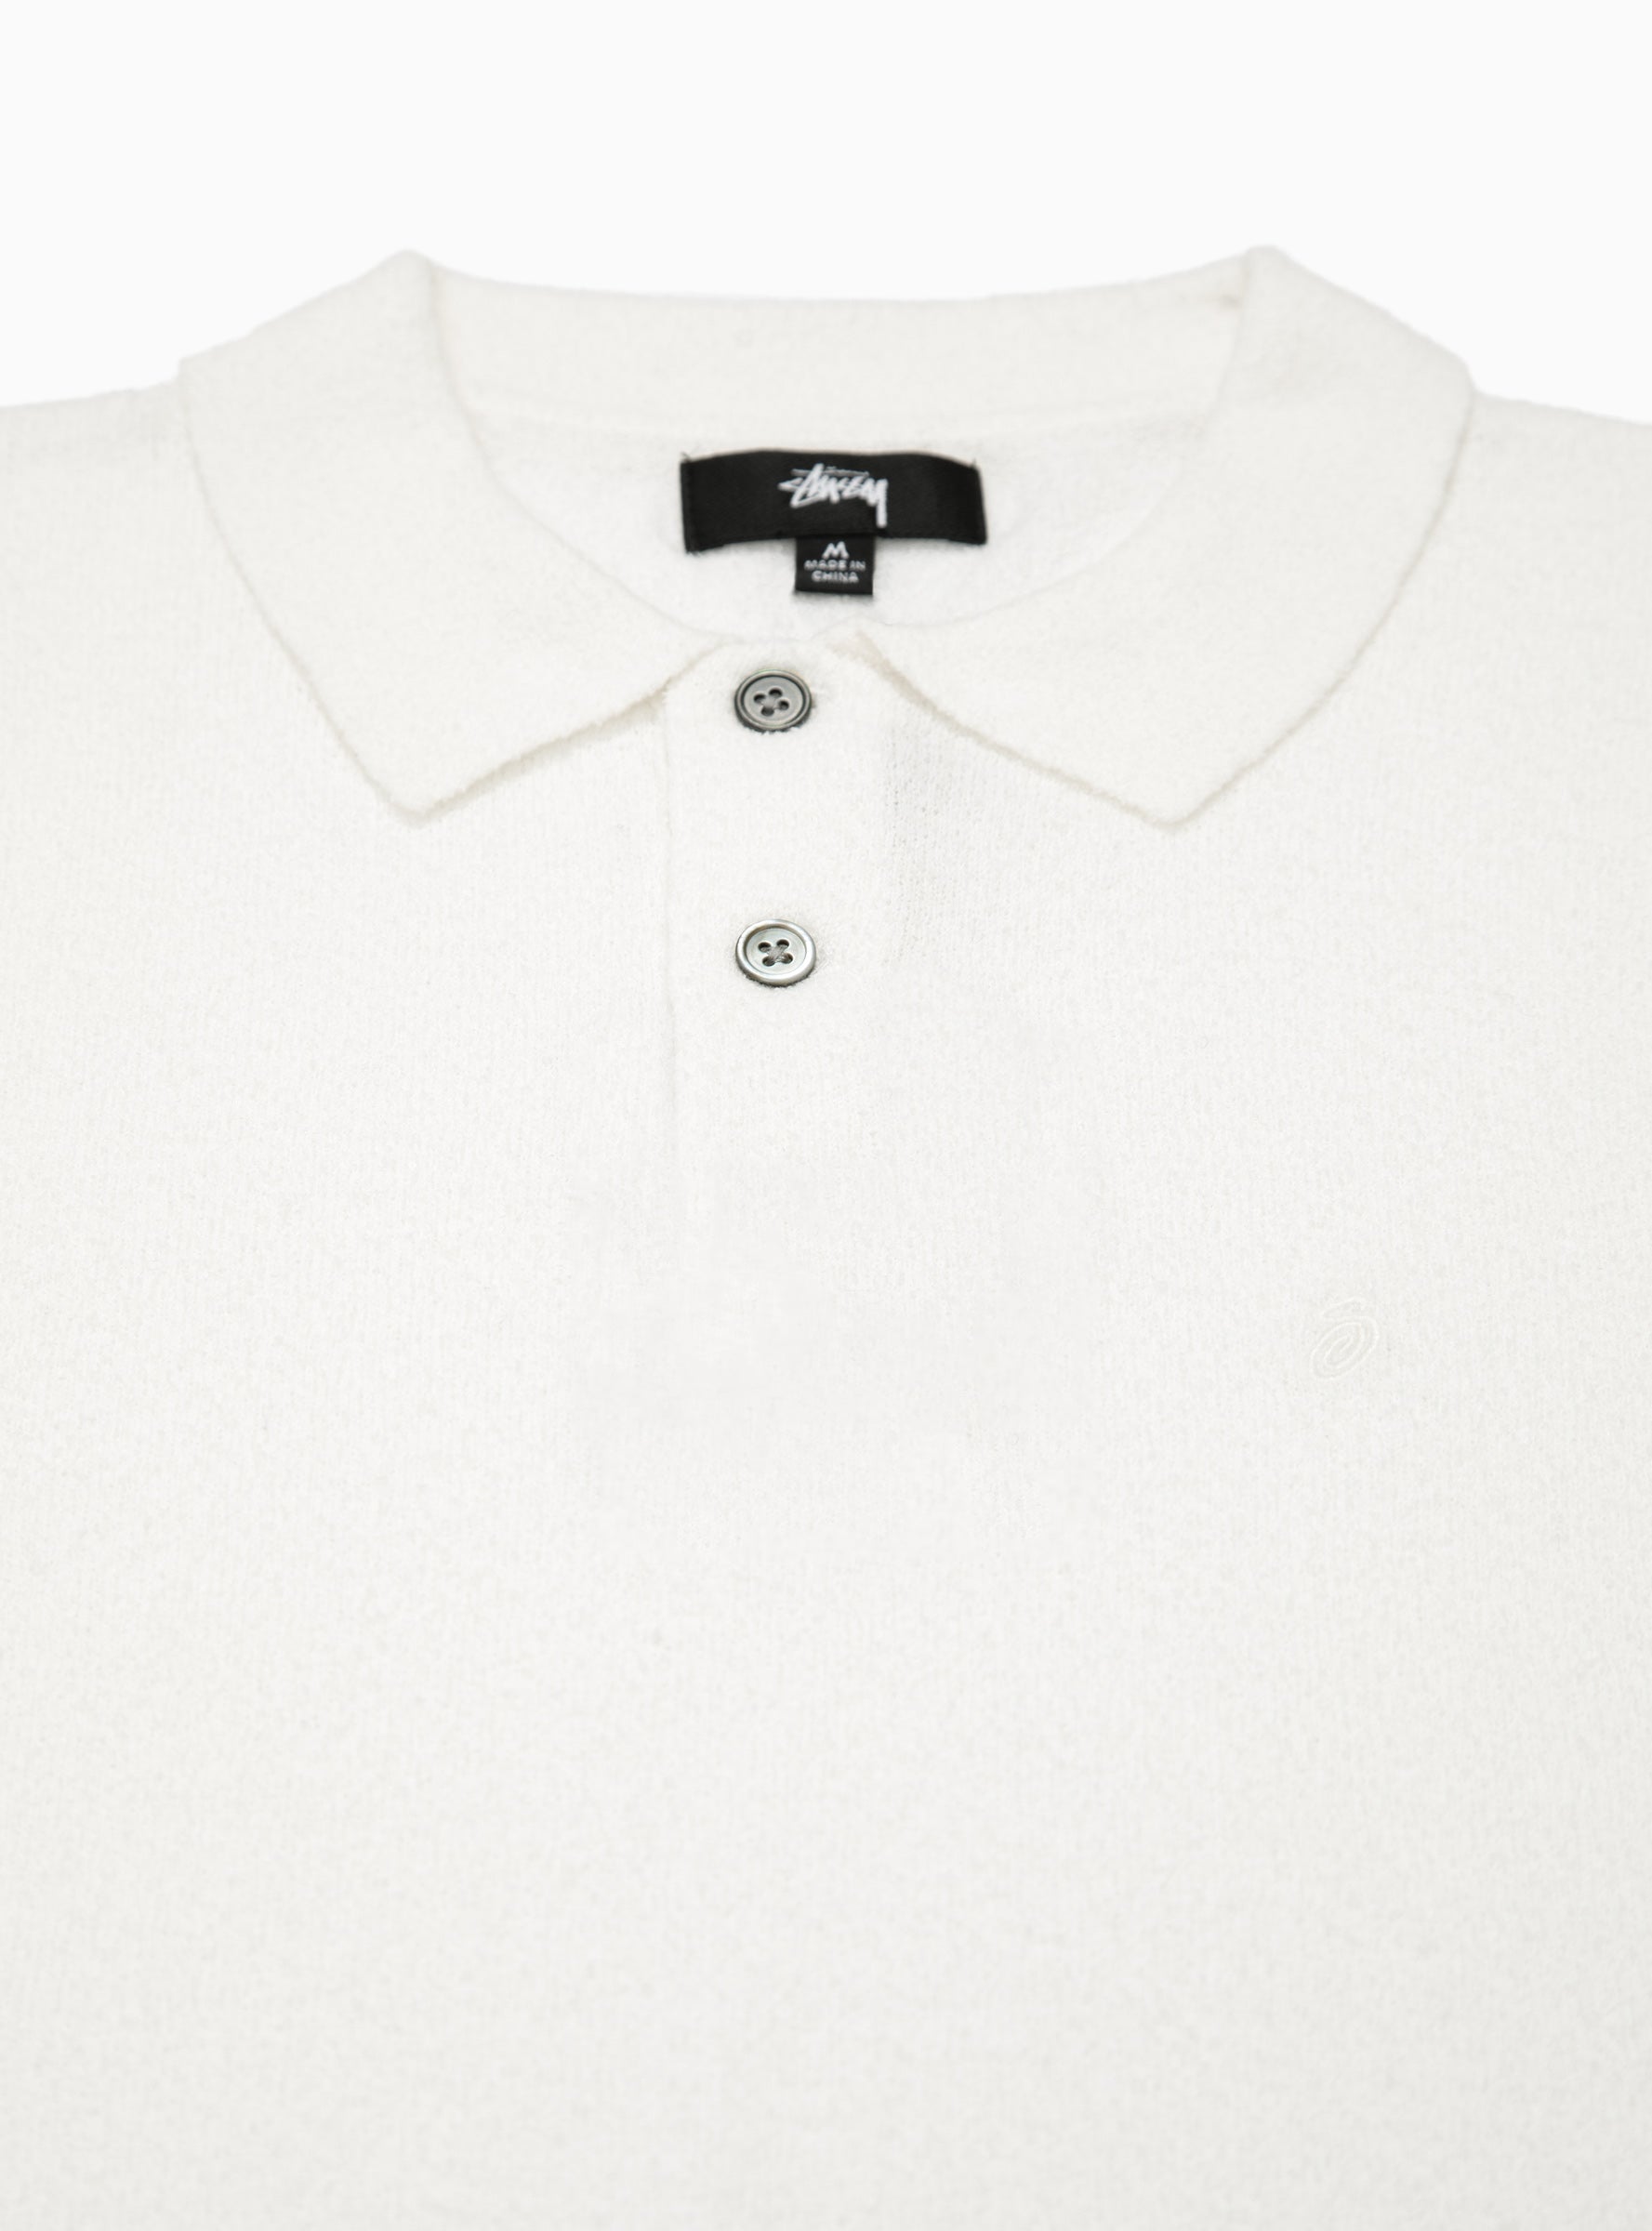 Stussy TEXTURED SS POLO SWEATER XL-